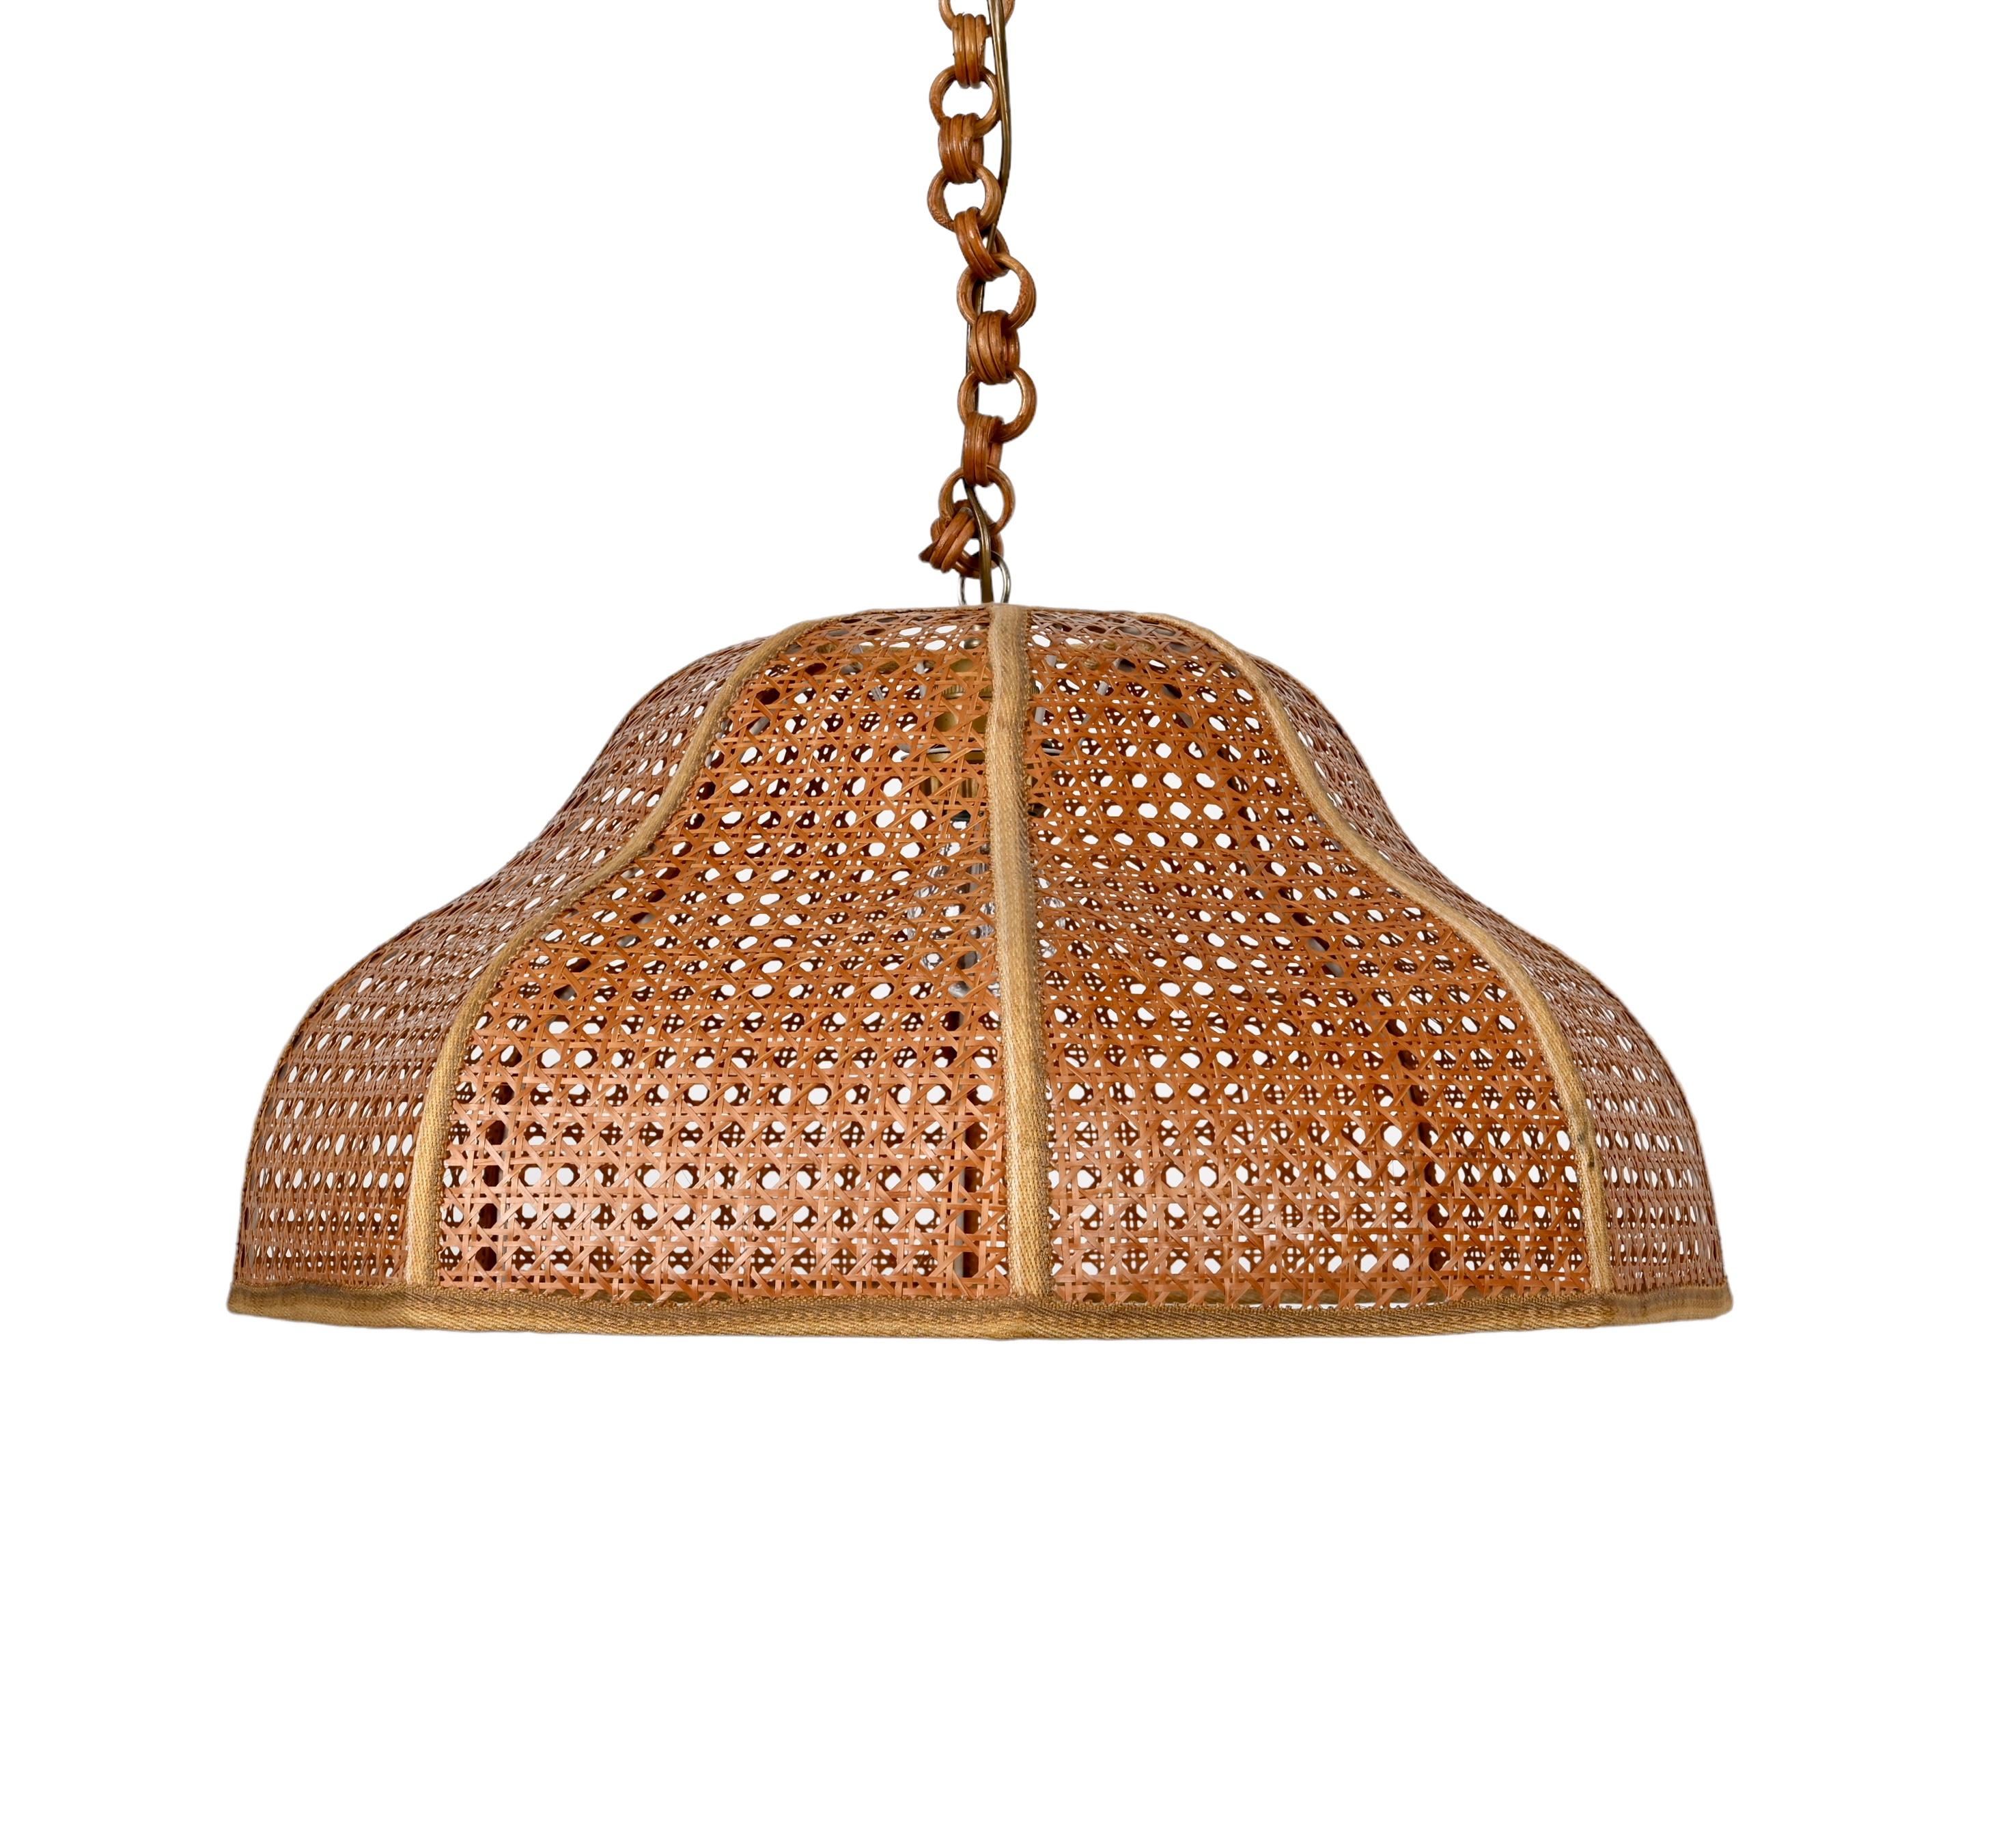 Remarkable mid century rattan and wicker pendant chandelier in the French Riviera style. This incredible piece was made in Italy during the 1960s.

This item is surprising because of the curved bamboo lampshade and a wicker cover structure. A